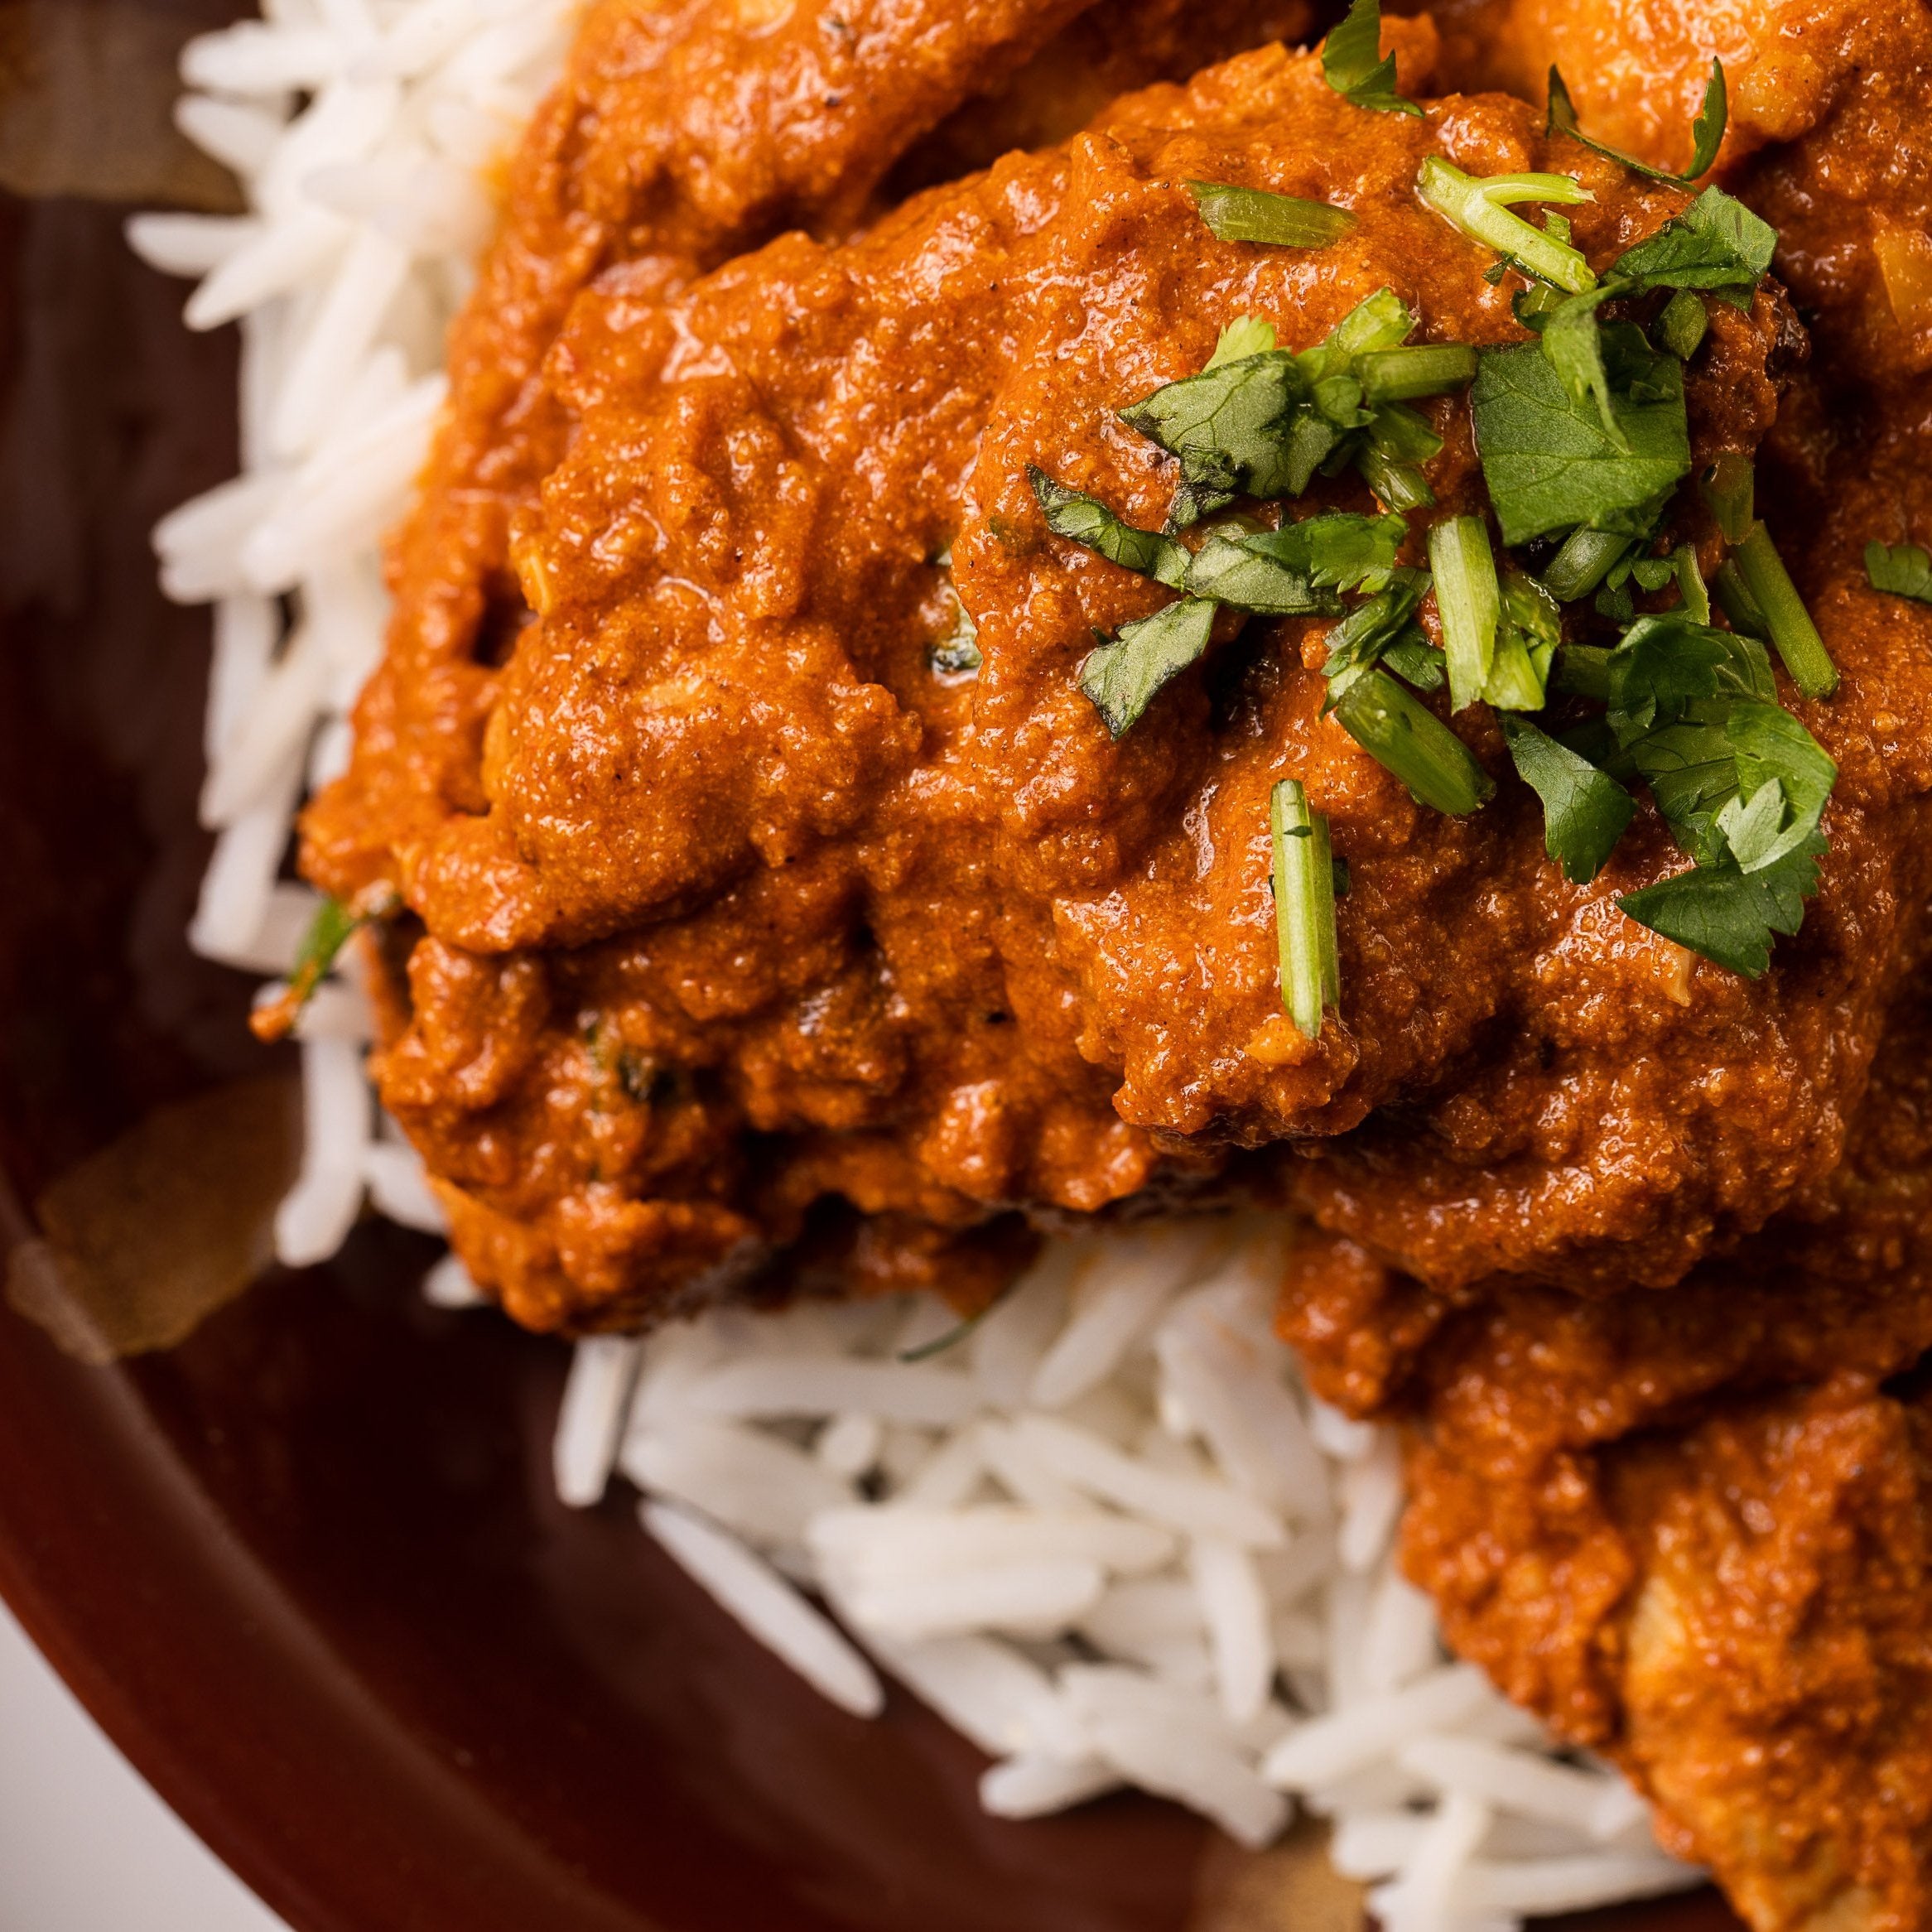 ready made home delivery meals featuring butter chicken on rice